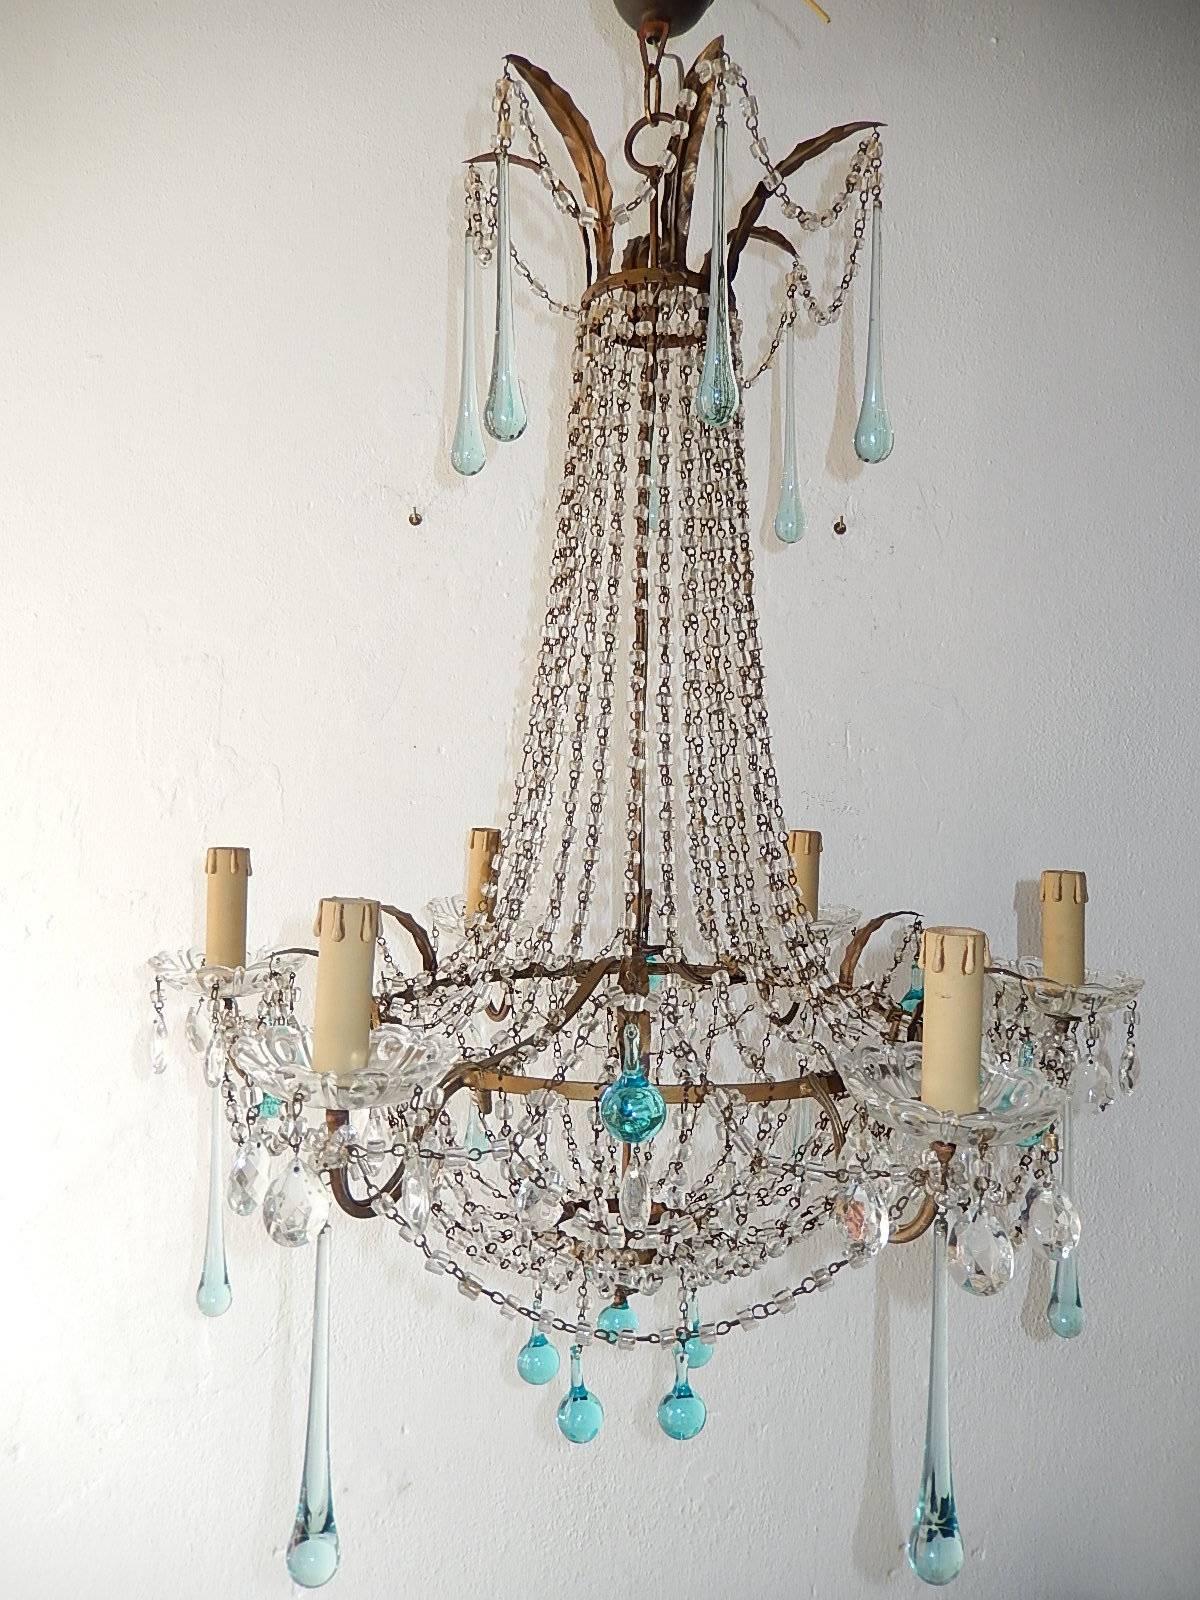 Housing six lights, sitting in crystal bobeches dripping with crystal prisms. Swags of macaroni beads and aqua Murano drops throughout. Rewired and ready to hang. Adding another 4 inches of canopy. Free priority shipping from Italy.